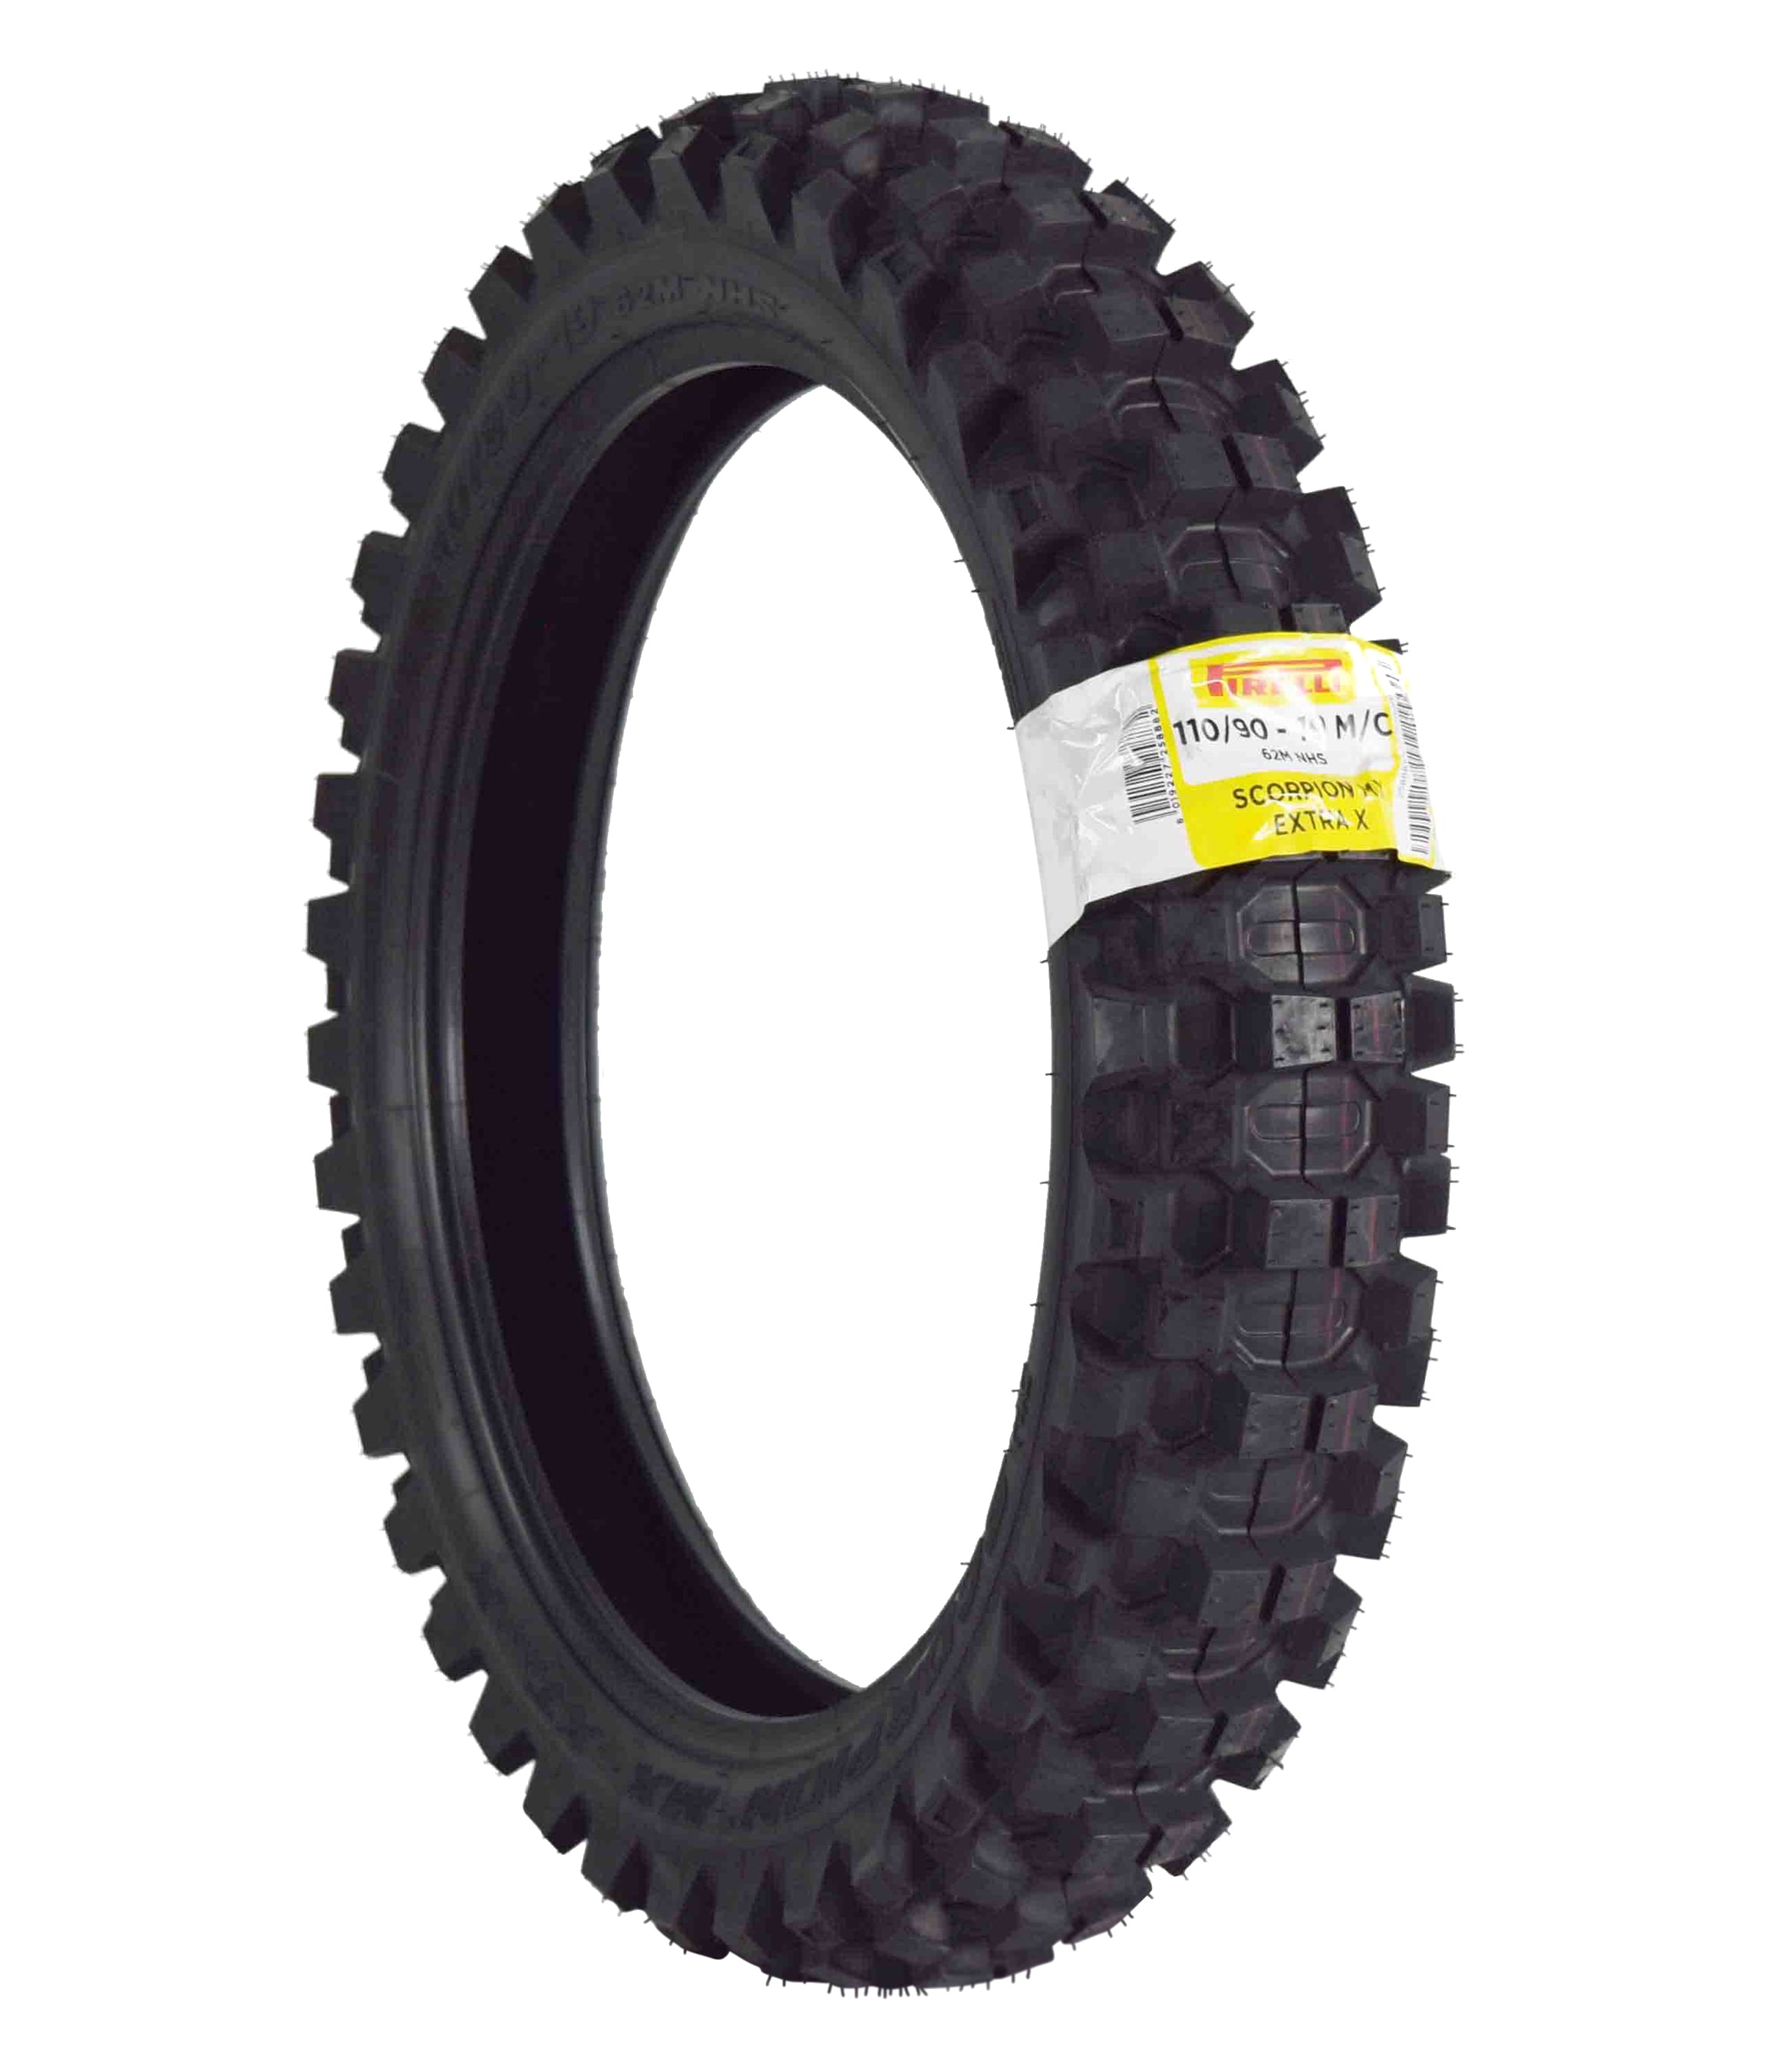 Sandy ProTrax Motocross Offroad Front 80/100-21 & Rear 110/90-19 Tires & Tubes Combo Kit Muddy Terrain Soft 